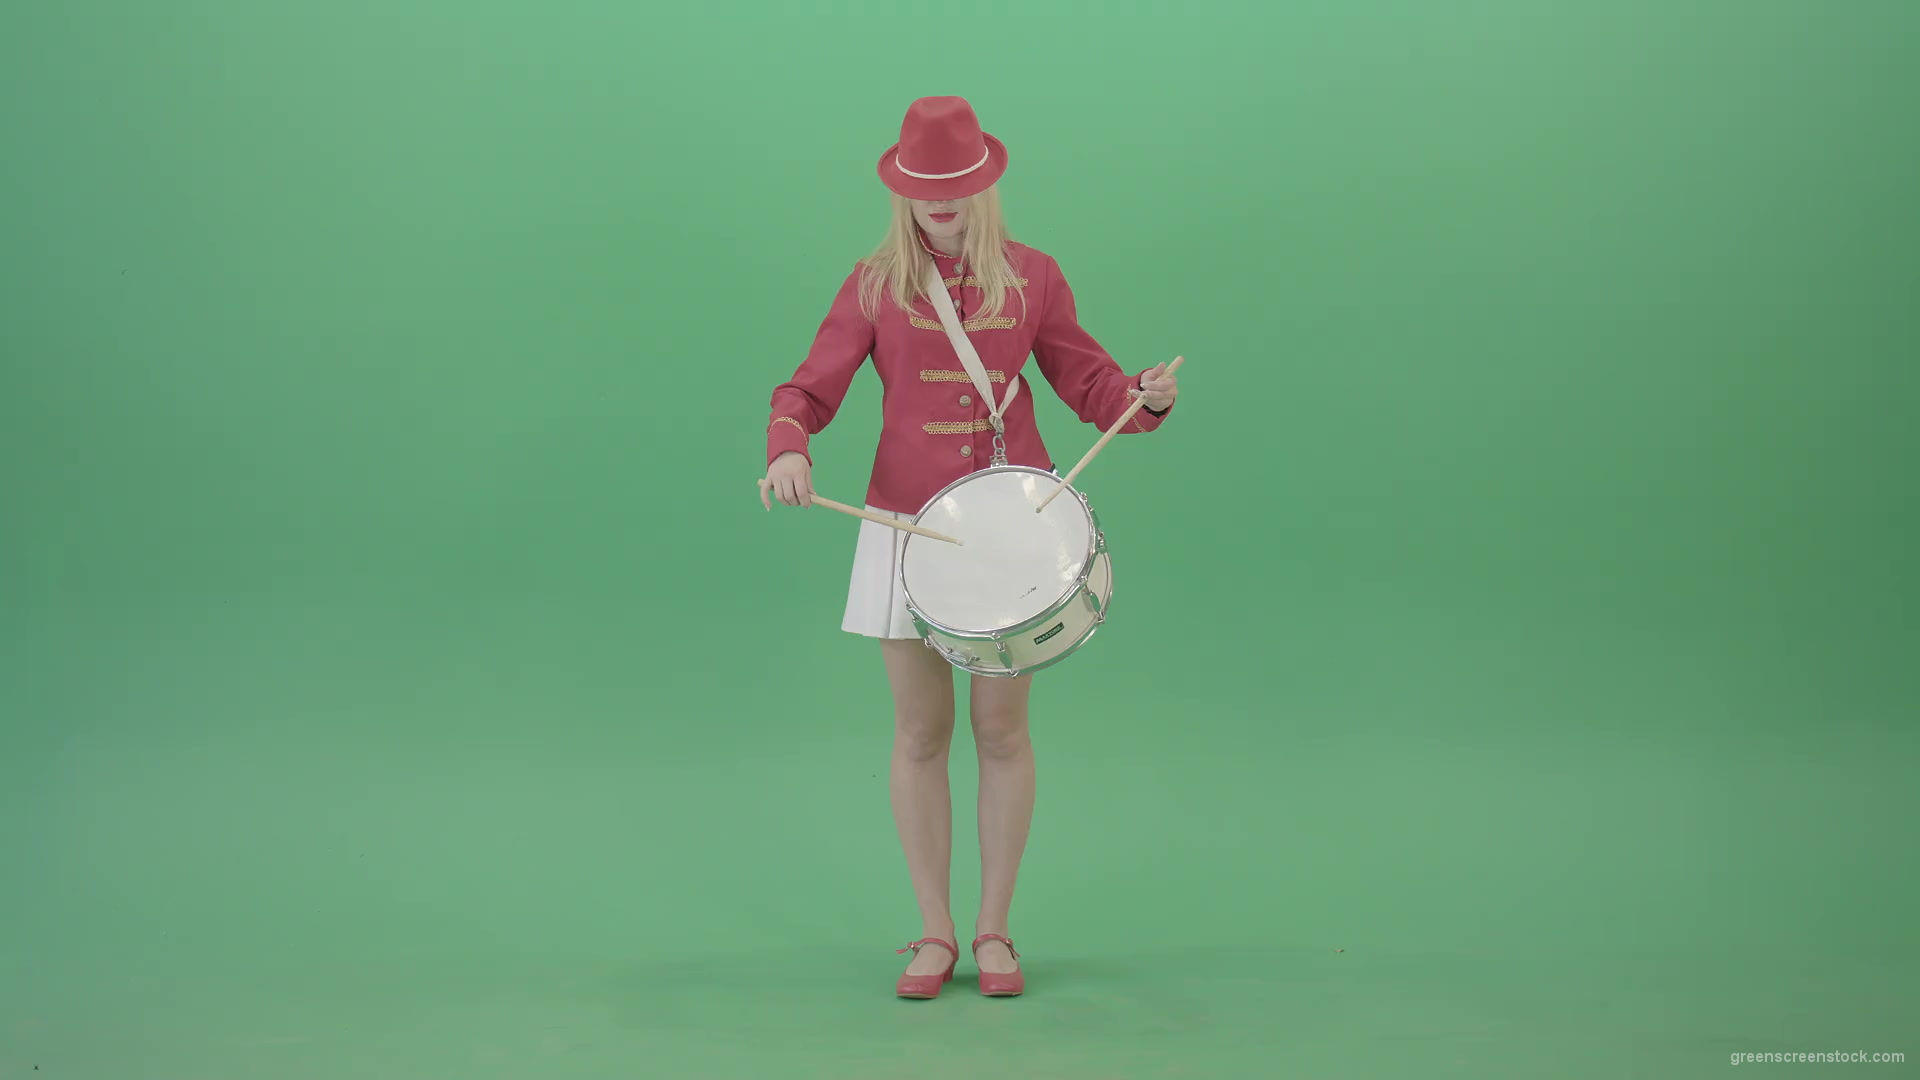 Blonde-Girl-playing-snare-drum-fast-and-marching-on-green-screen-4K-Video-Footage-1920_001 Green Screen Stock